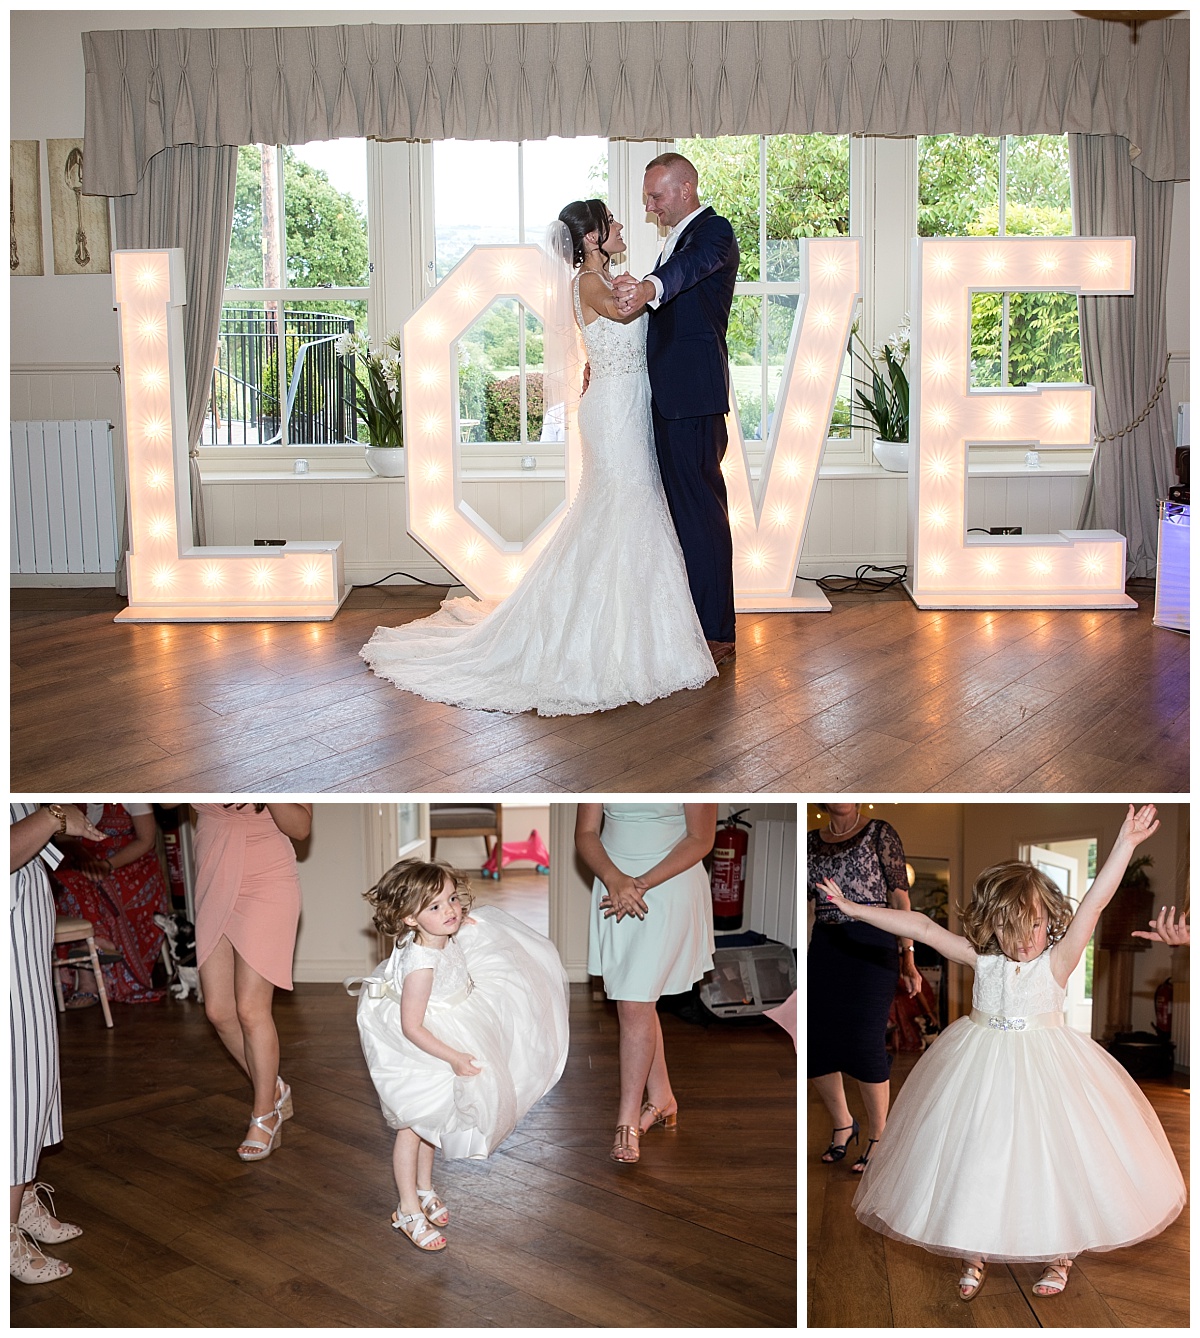 Wedding Photography Manchester - Victoria and Phillips Shireburn Arms wedding 83